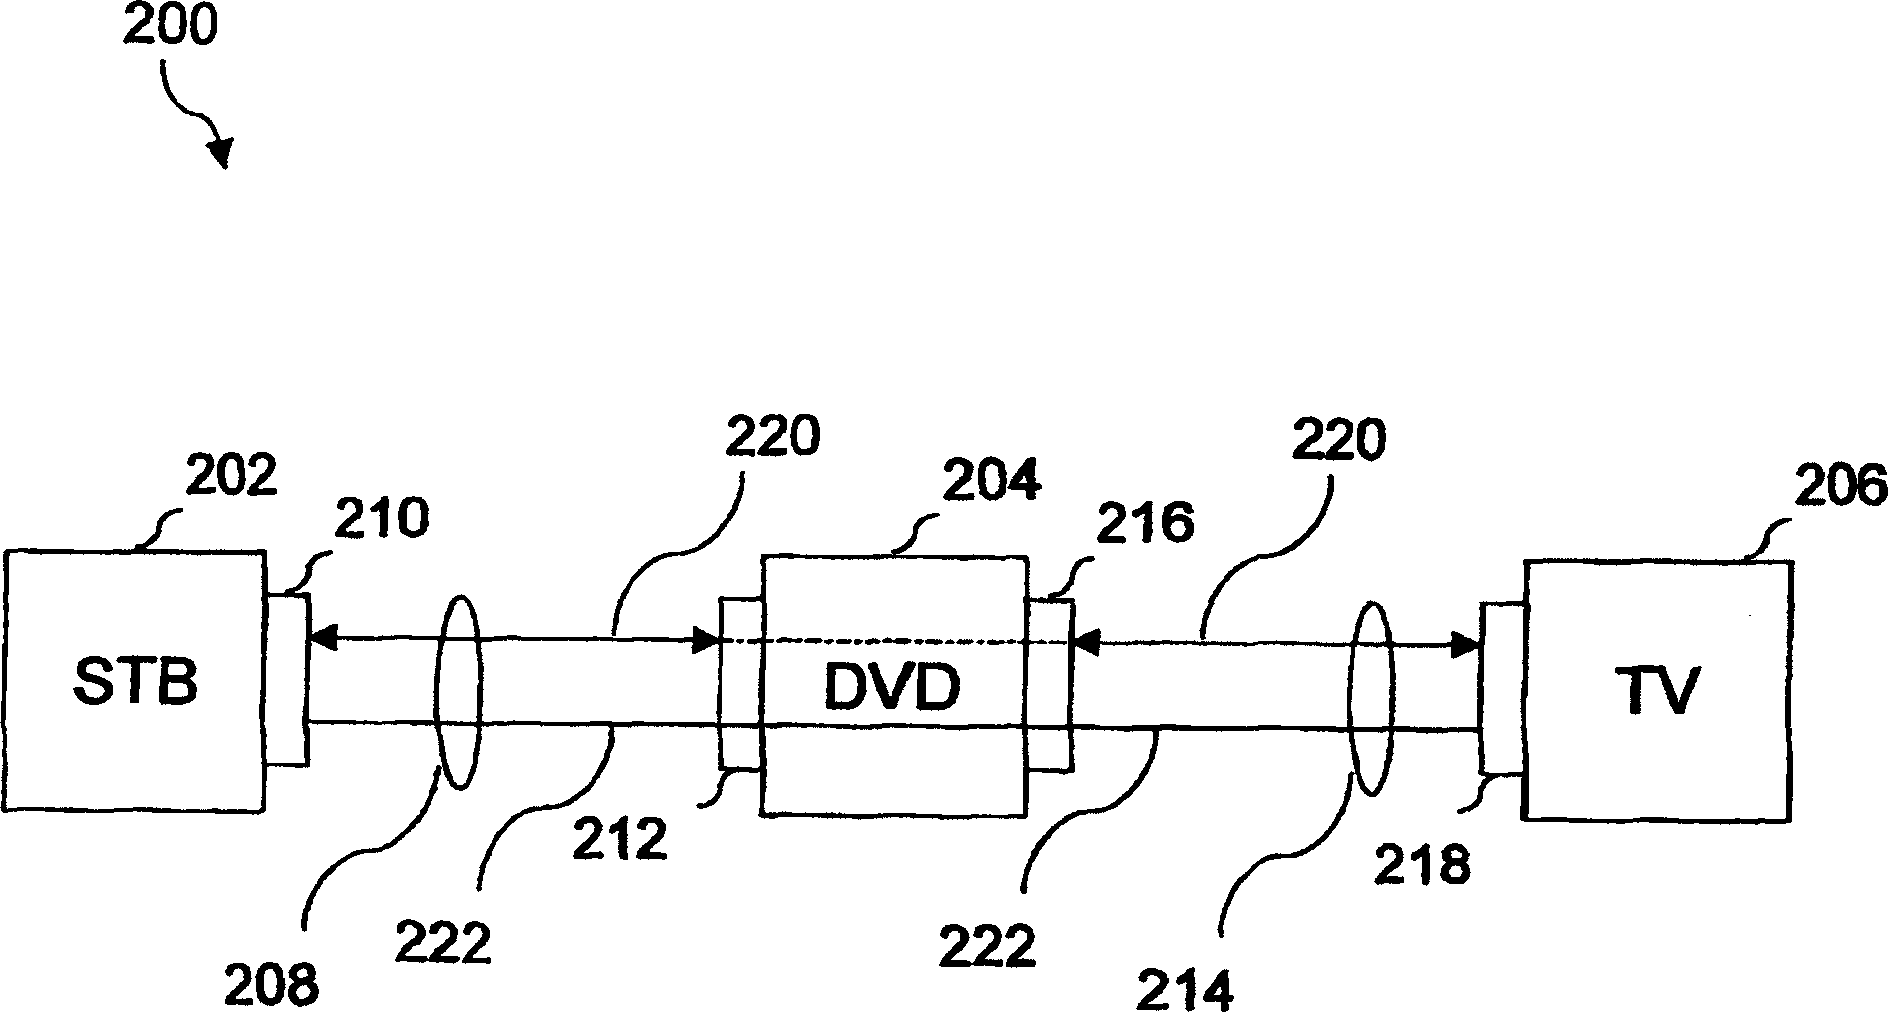 Improved interconnection between components of a home entertainment system